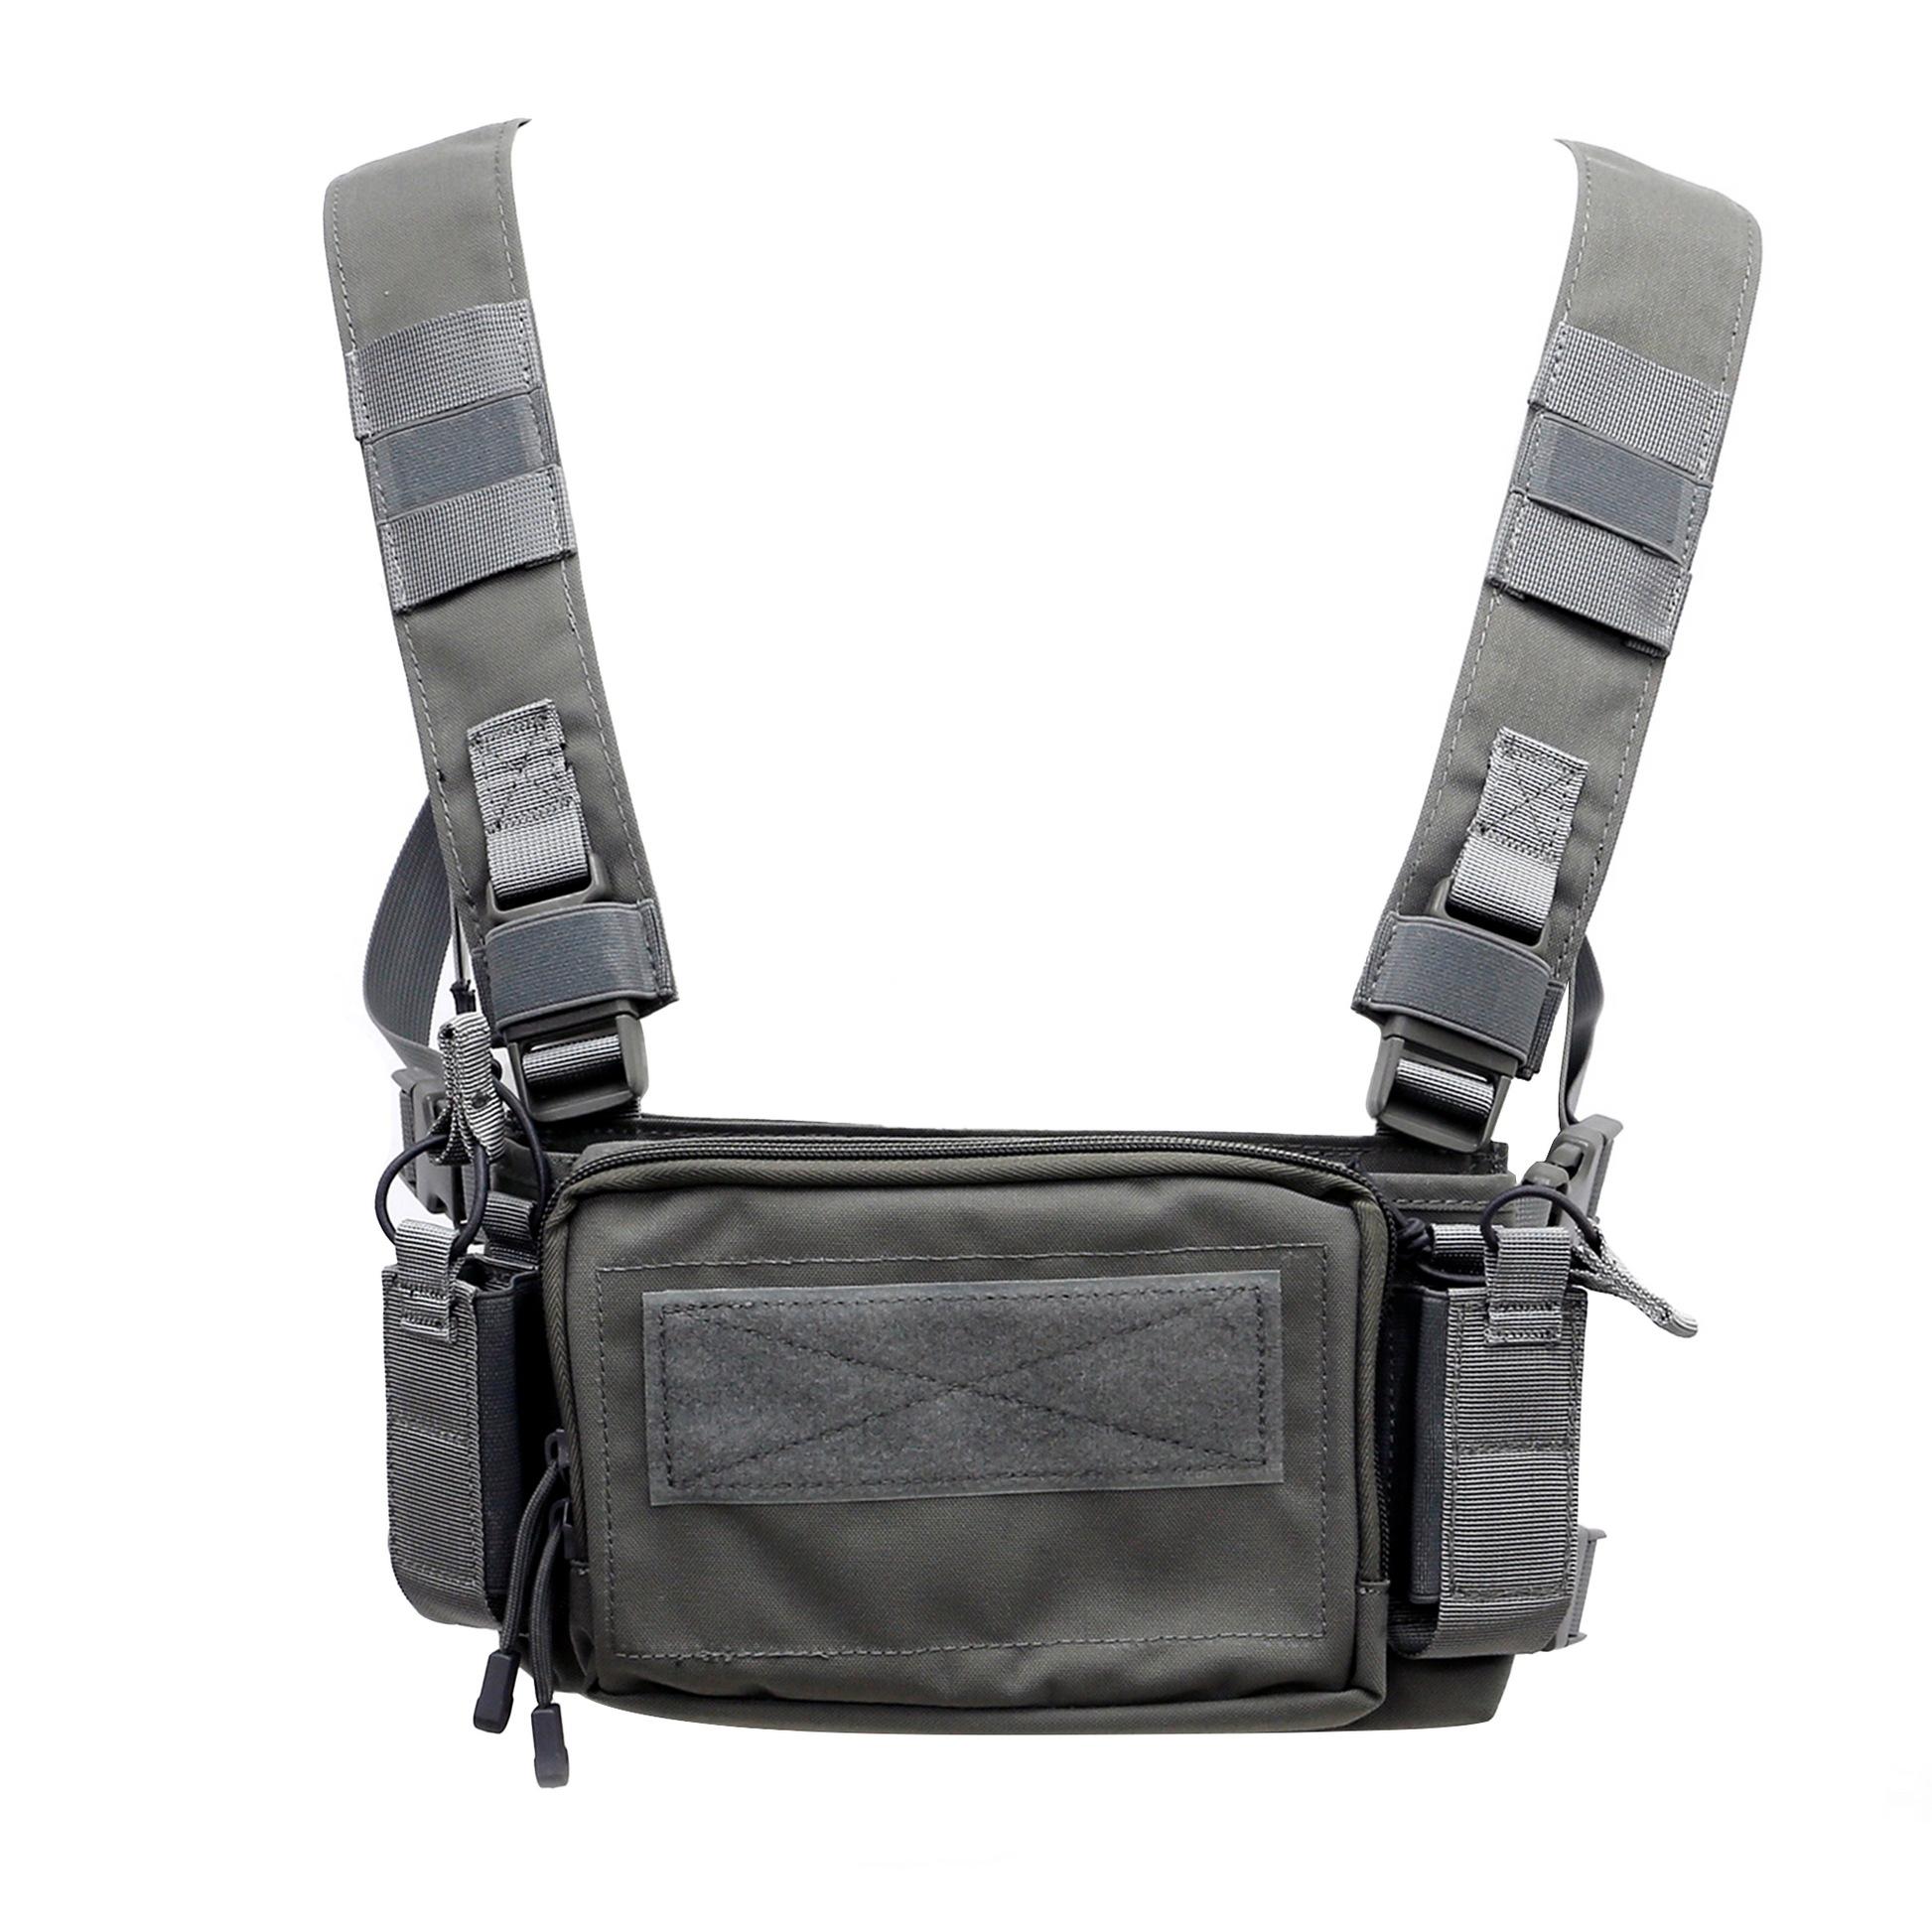 Minimalist Chest Rig – IJ Tactical